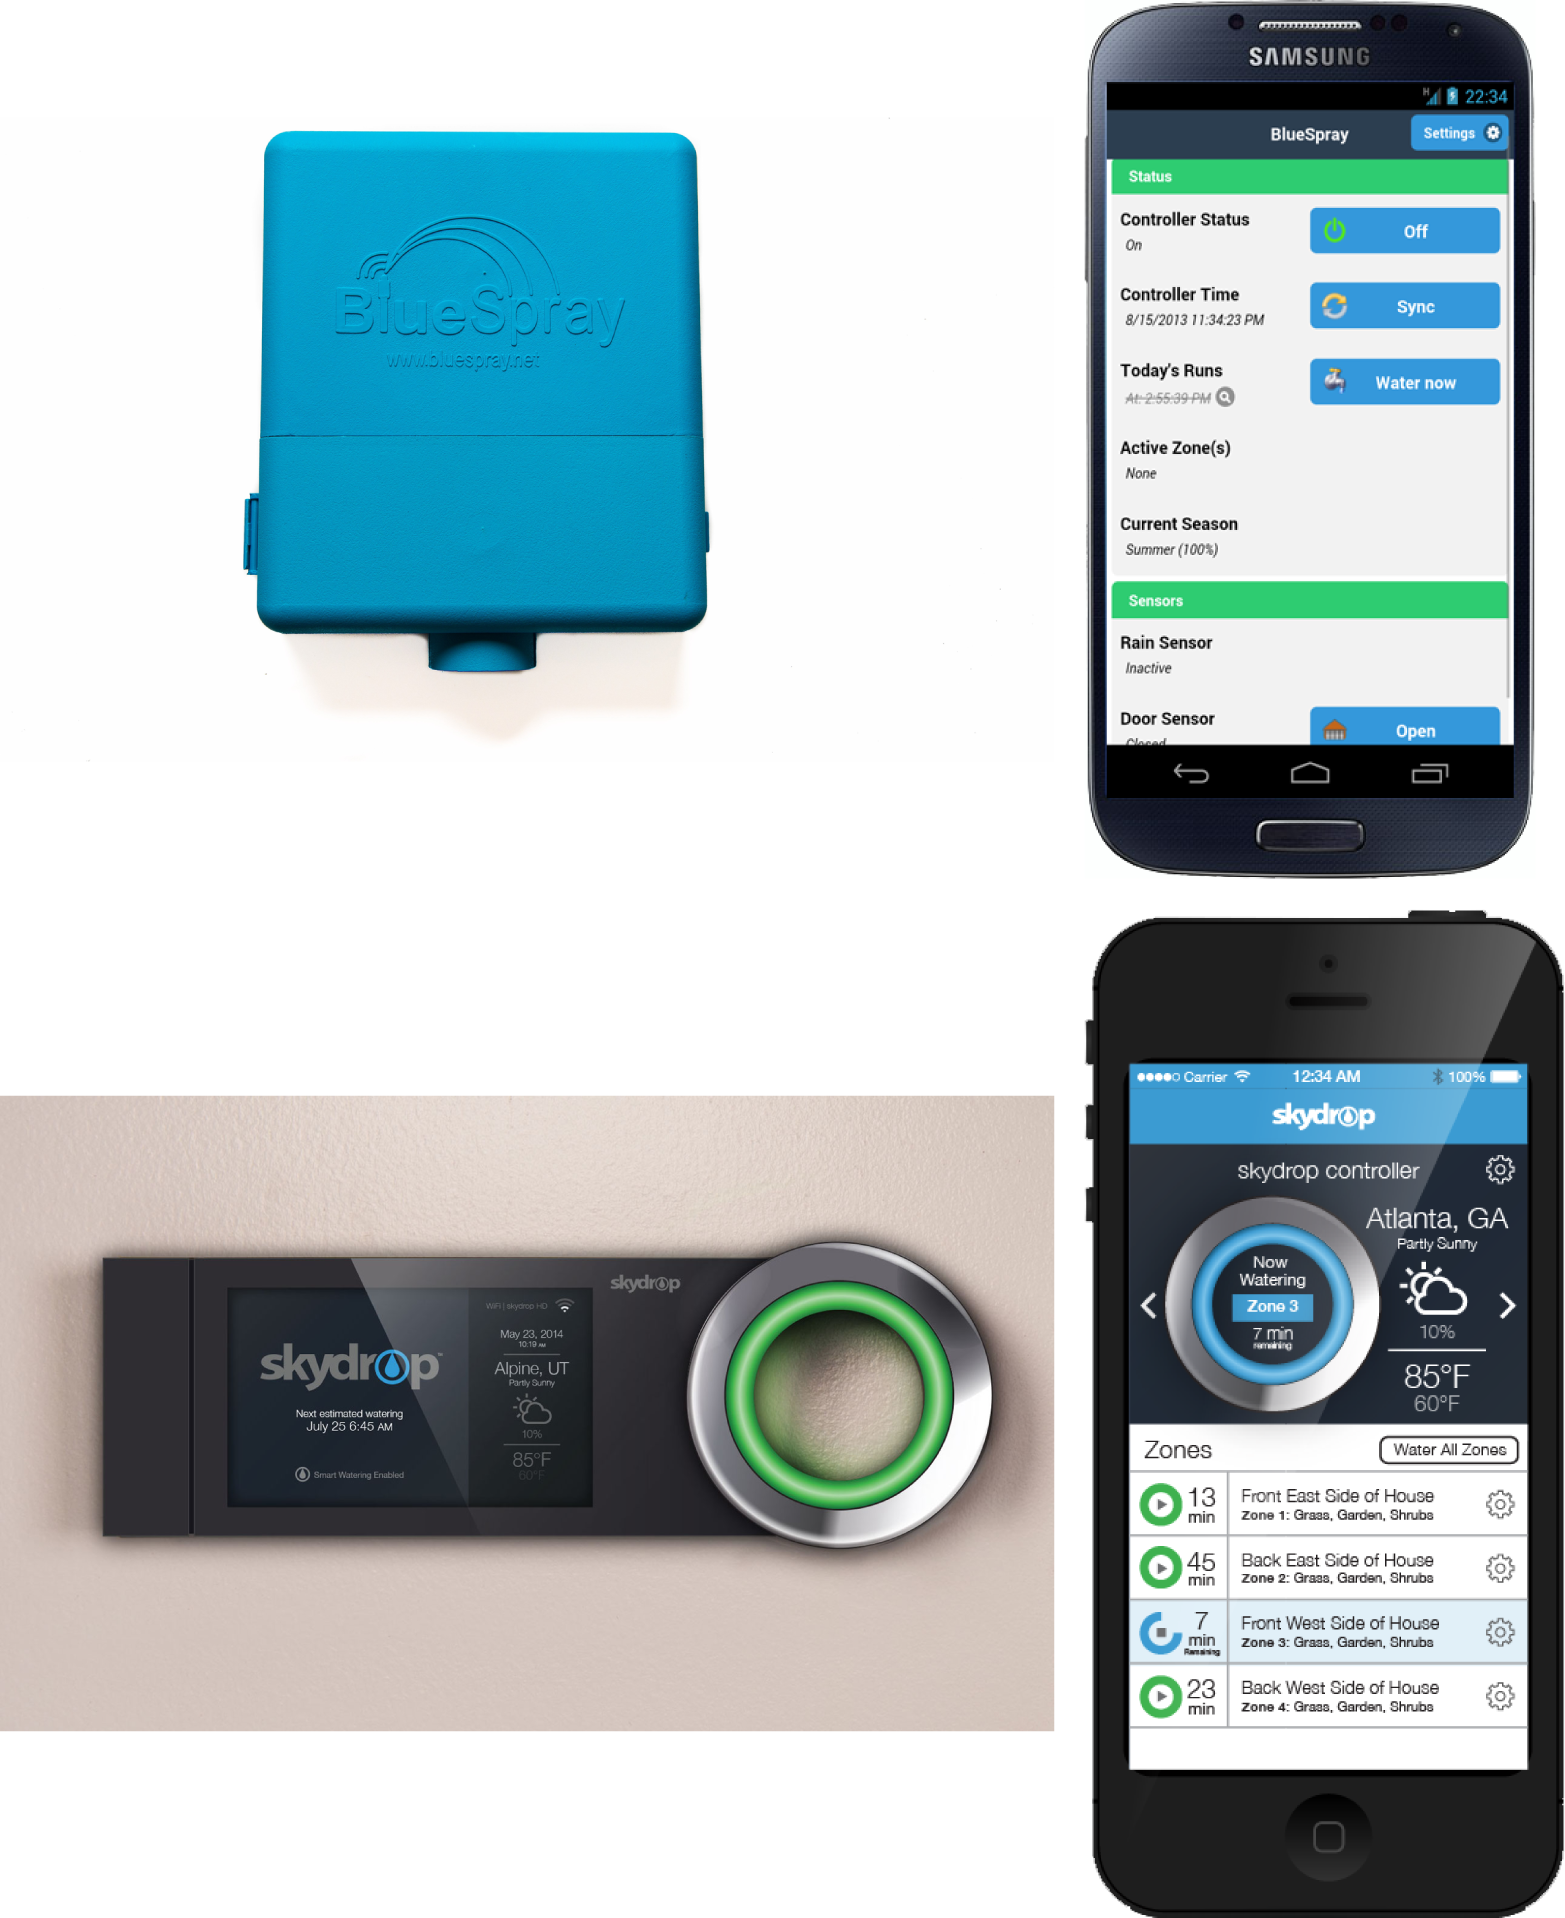 All interactions with the Bluespray irrigation controller are handled via a smartphone app, while the skydrop has full controls on both device and smartphone app (images: Bluespray and skydrop).